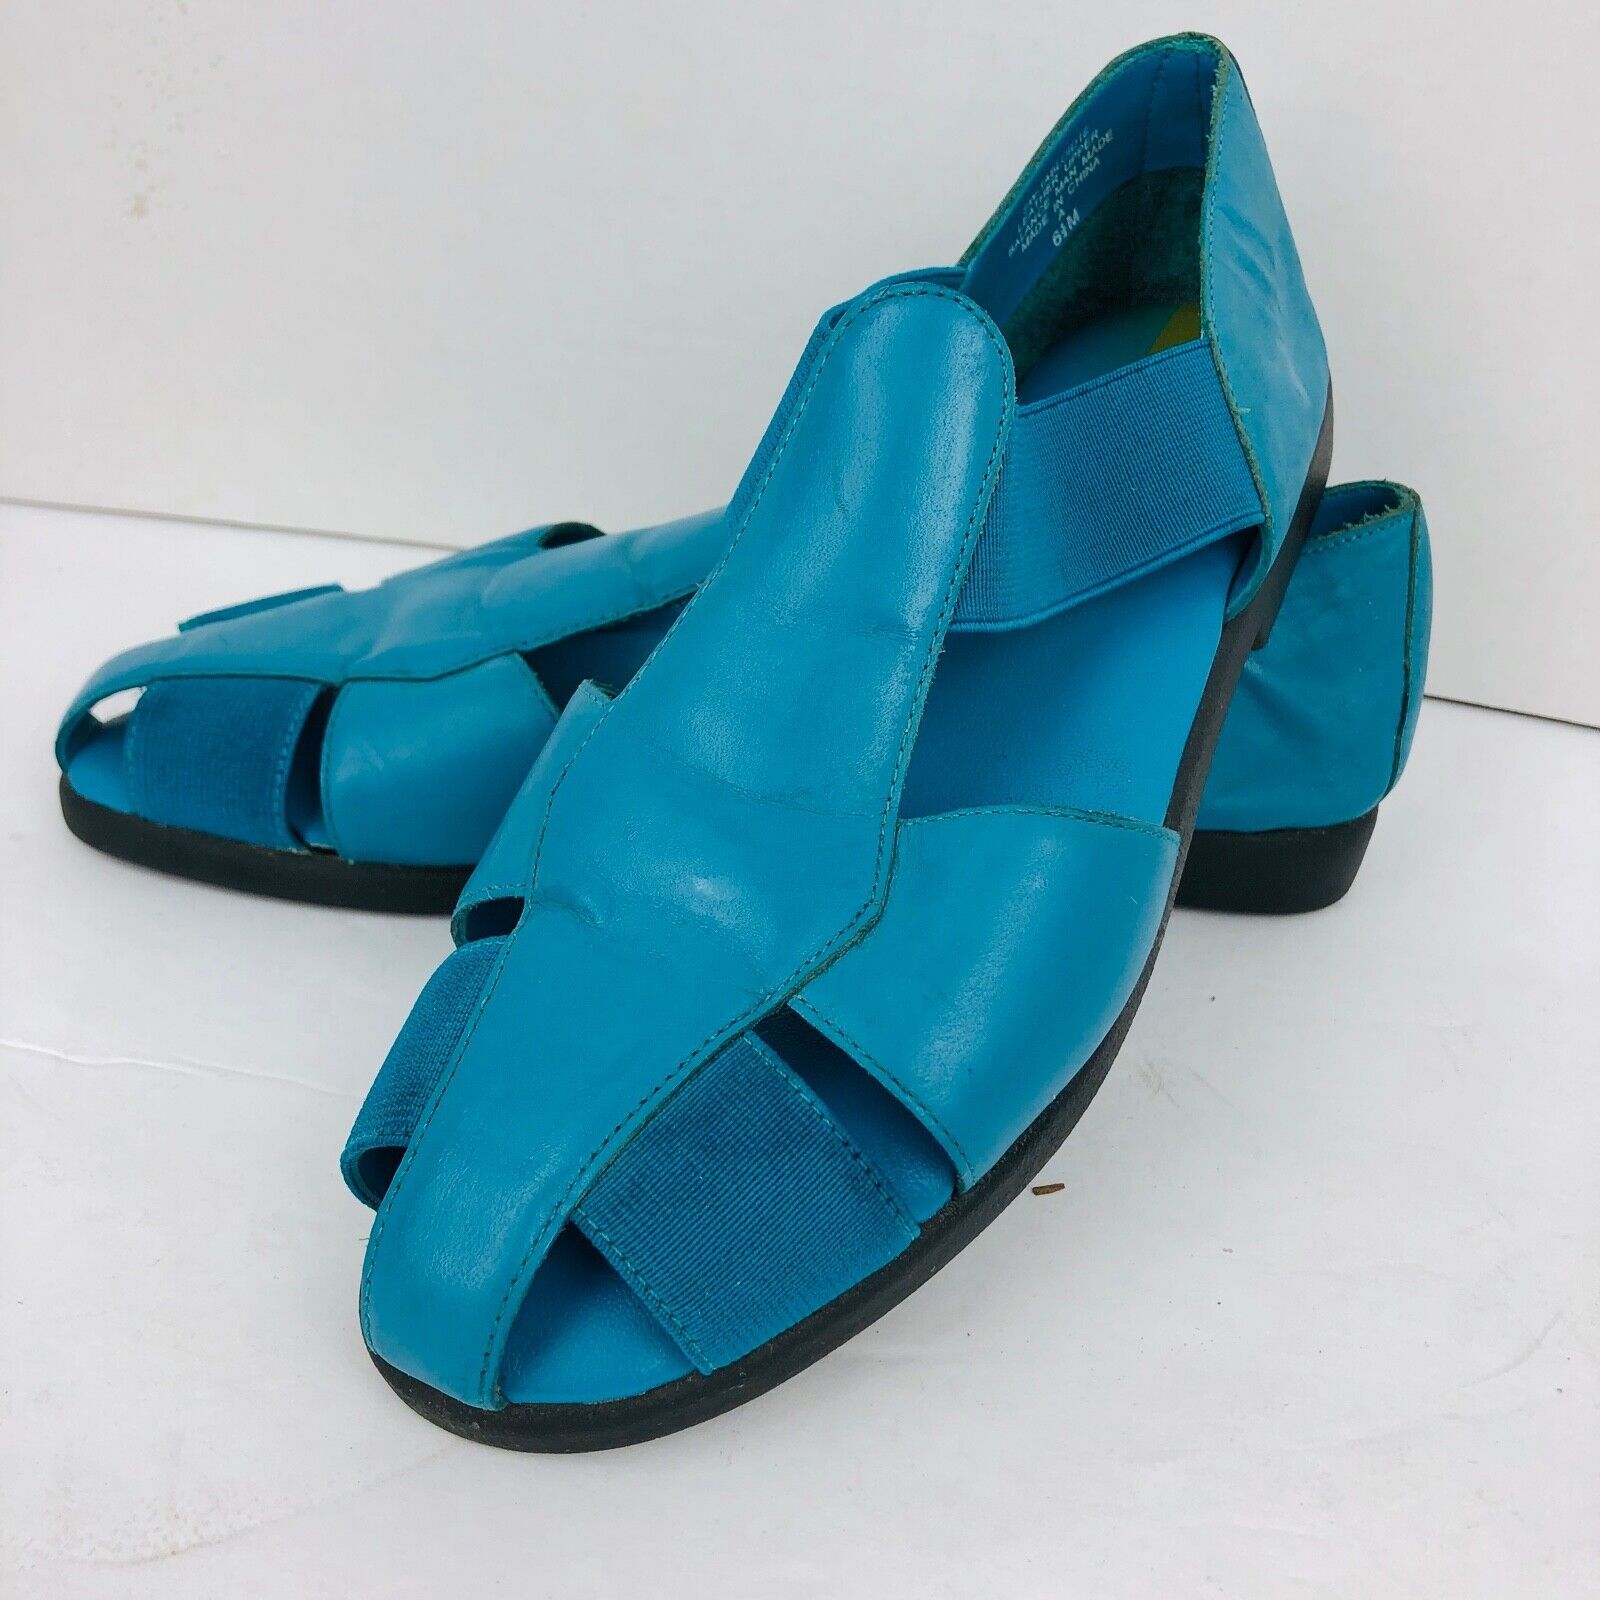 Primary image for Easy Spirit Lite Size 6.5 M Blue Teal Flat Sandal Stretch Shoe Turquoise 